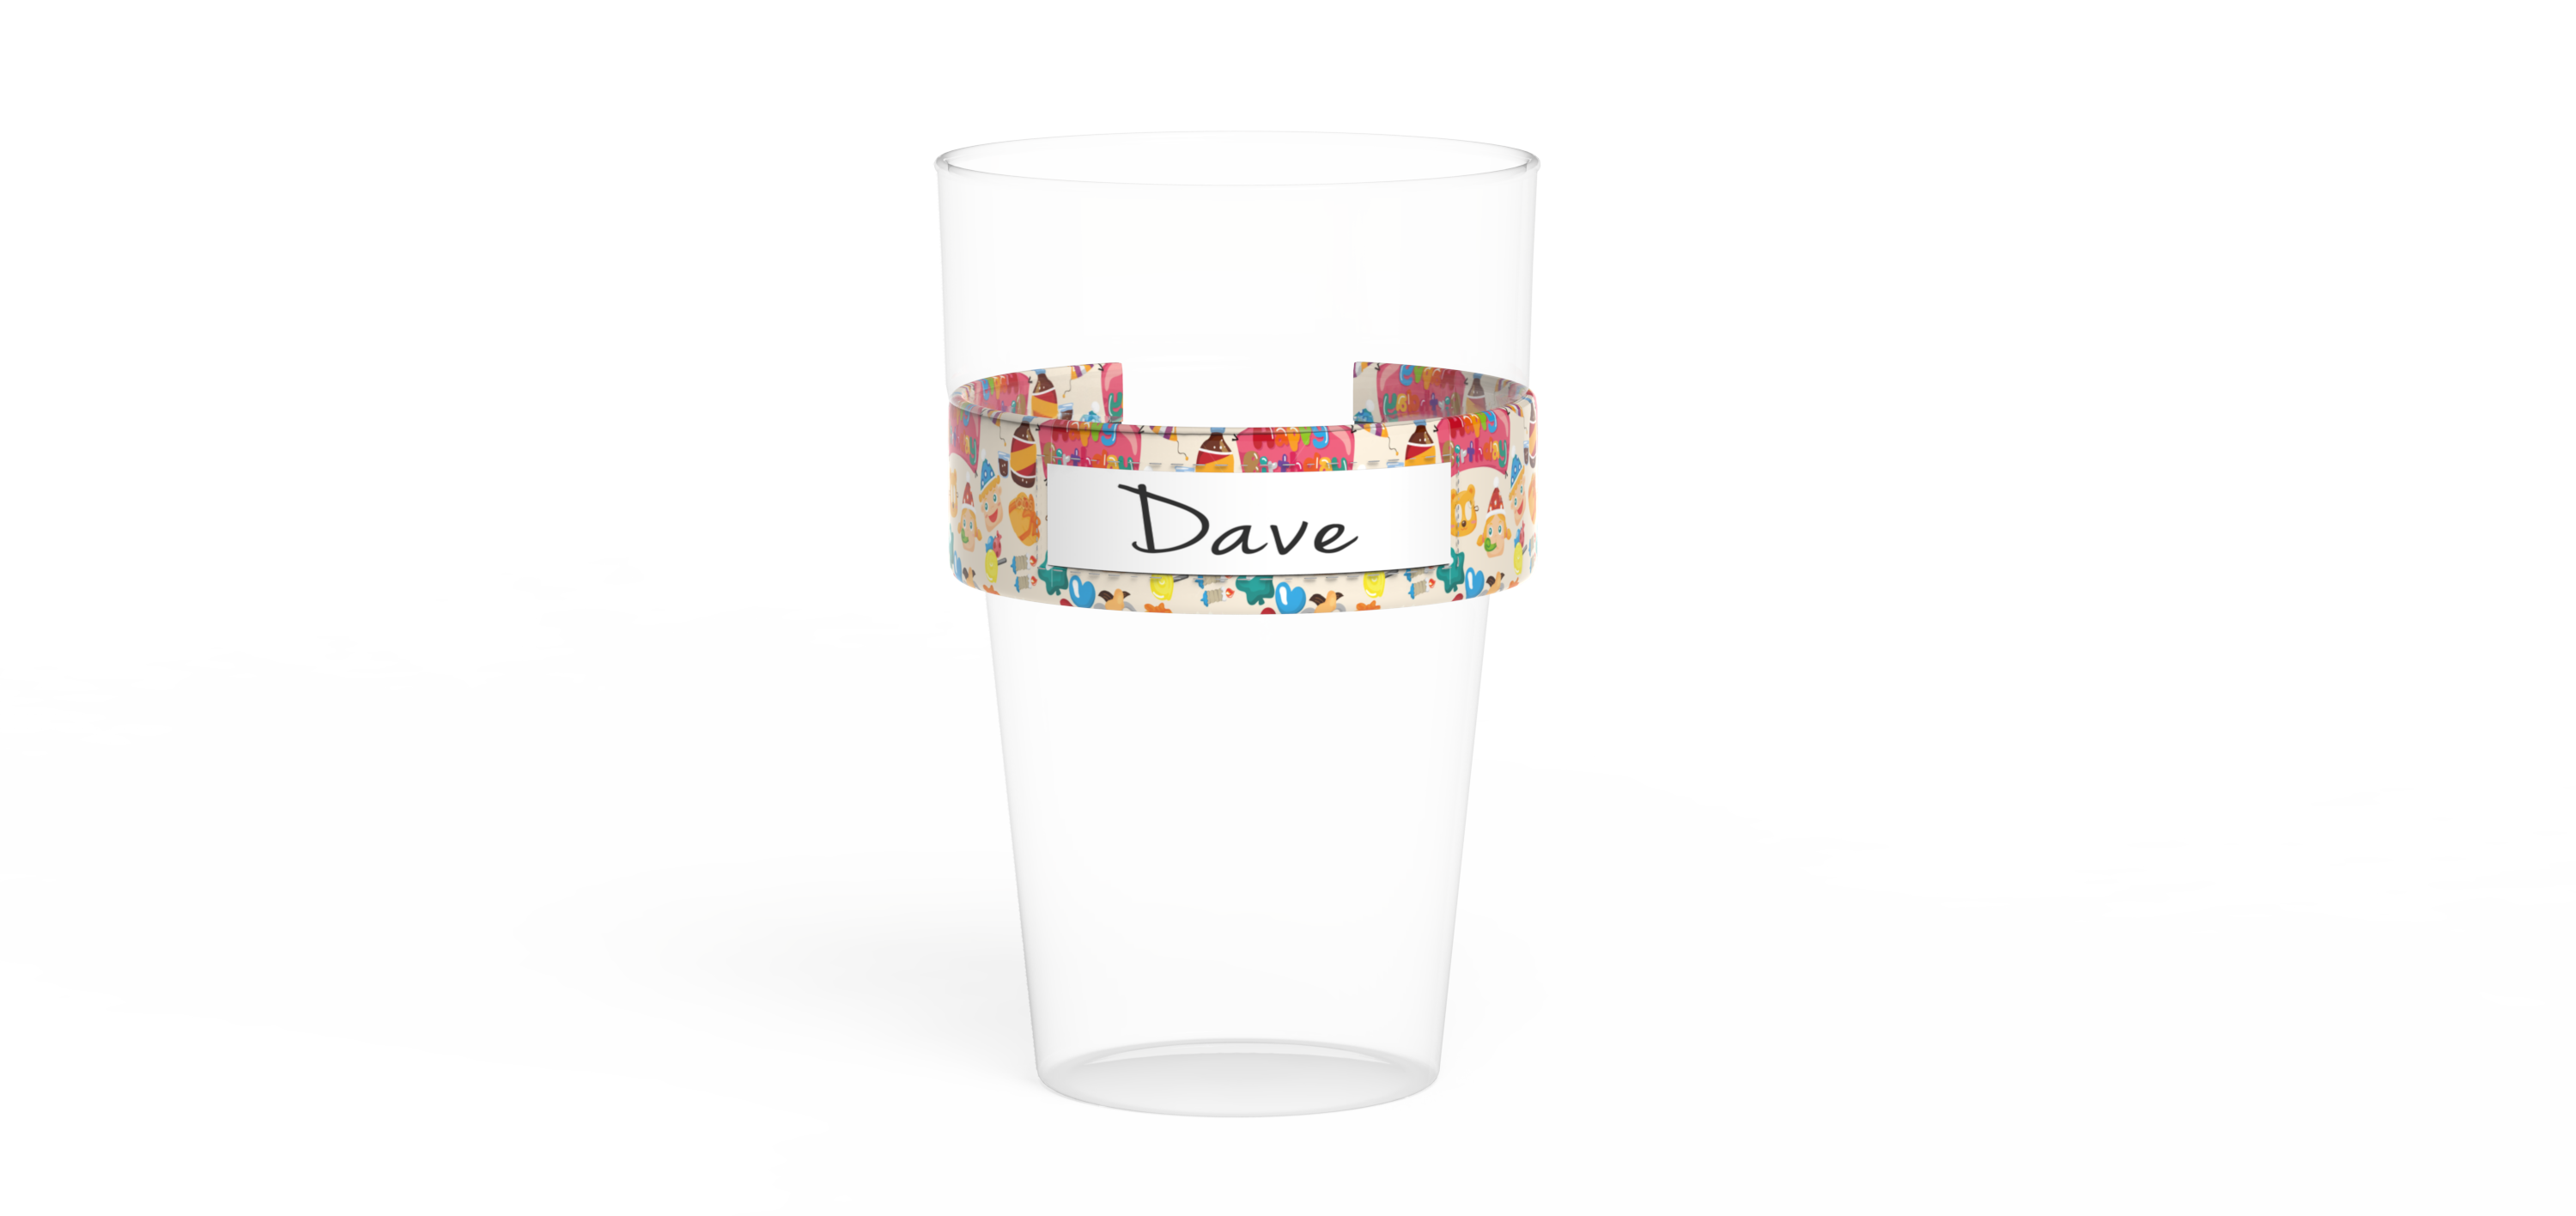 One simply needs to write their name on the label around the cup and it will be readily identifiable to anyone at the party.